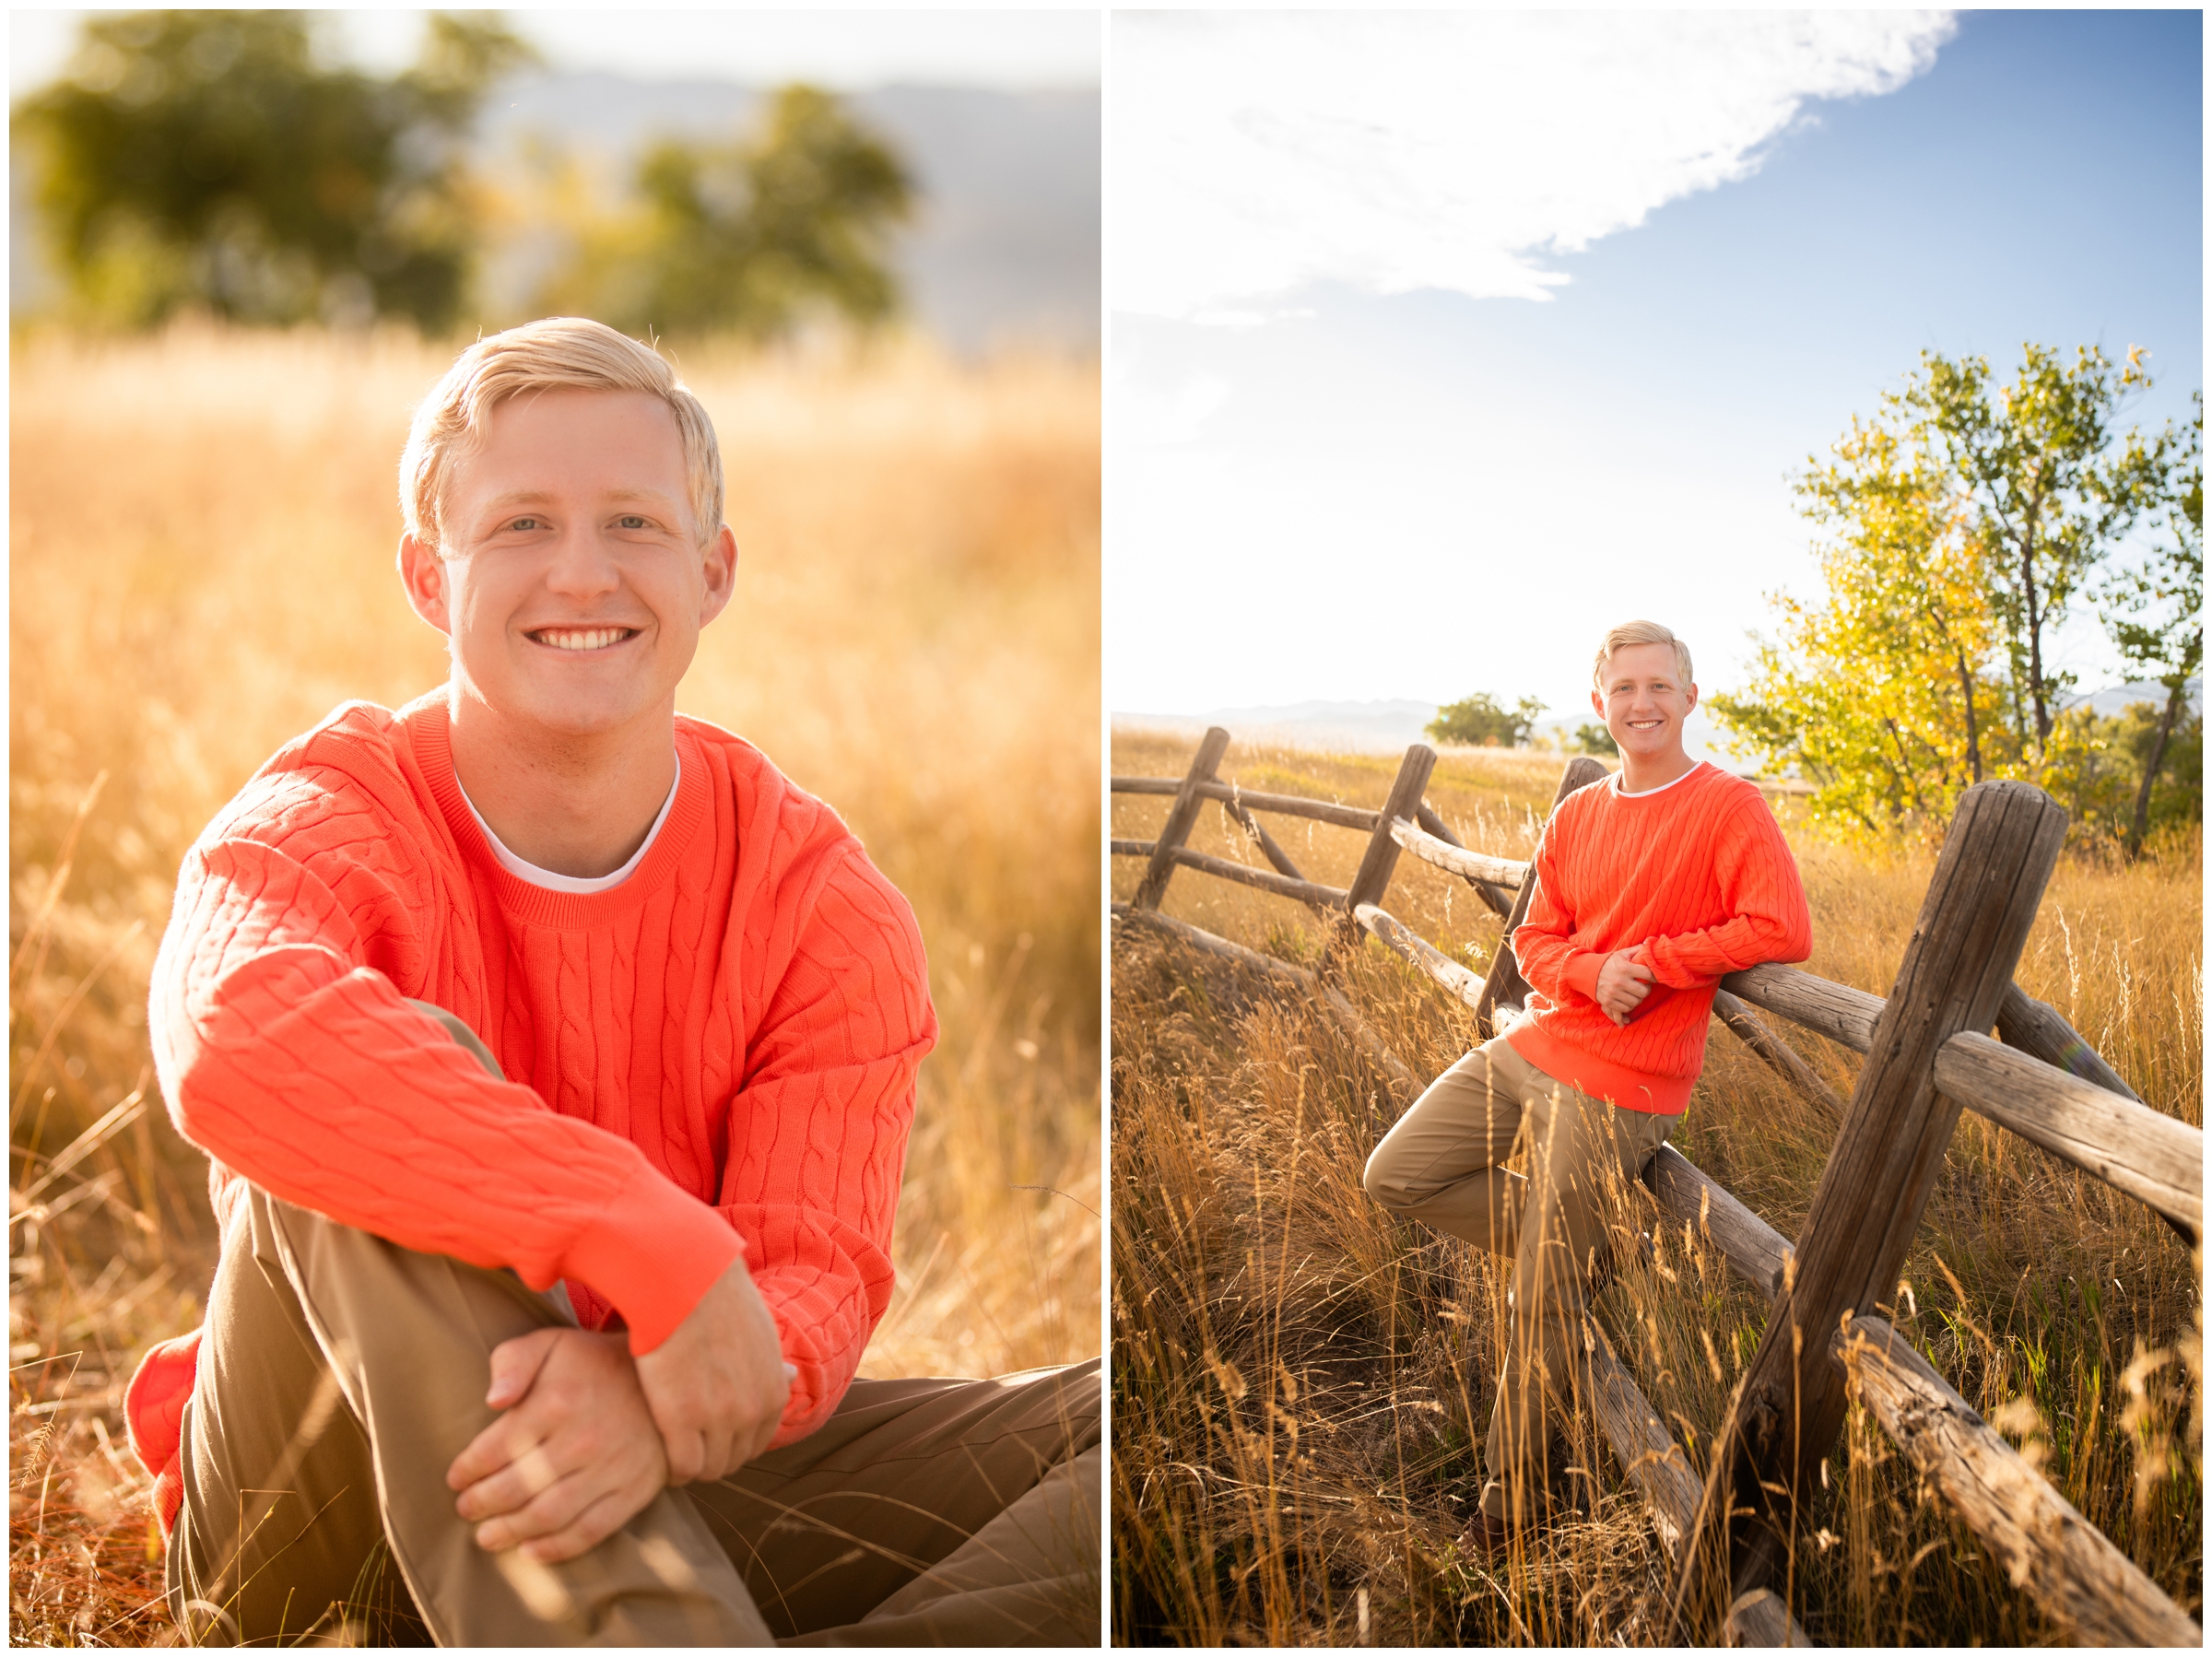 Frederick High senior photos at Coot Lake during fall by Colorado portrait photographer Plum Pretty Photography